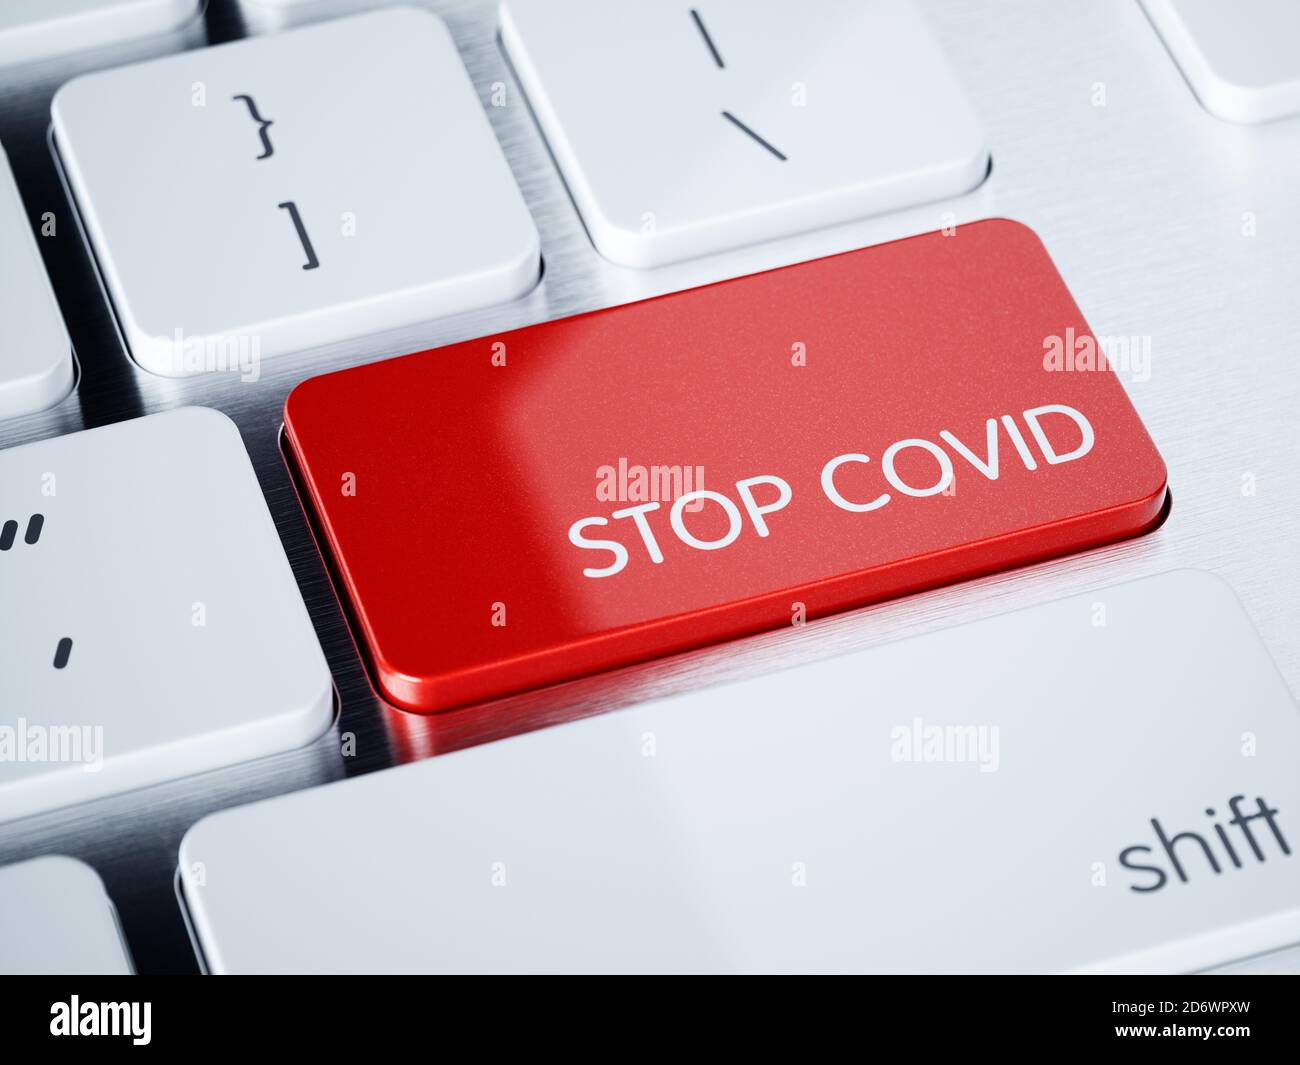 Keyboard with red stop covid key. 3d rendering illustration Stock Photo